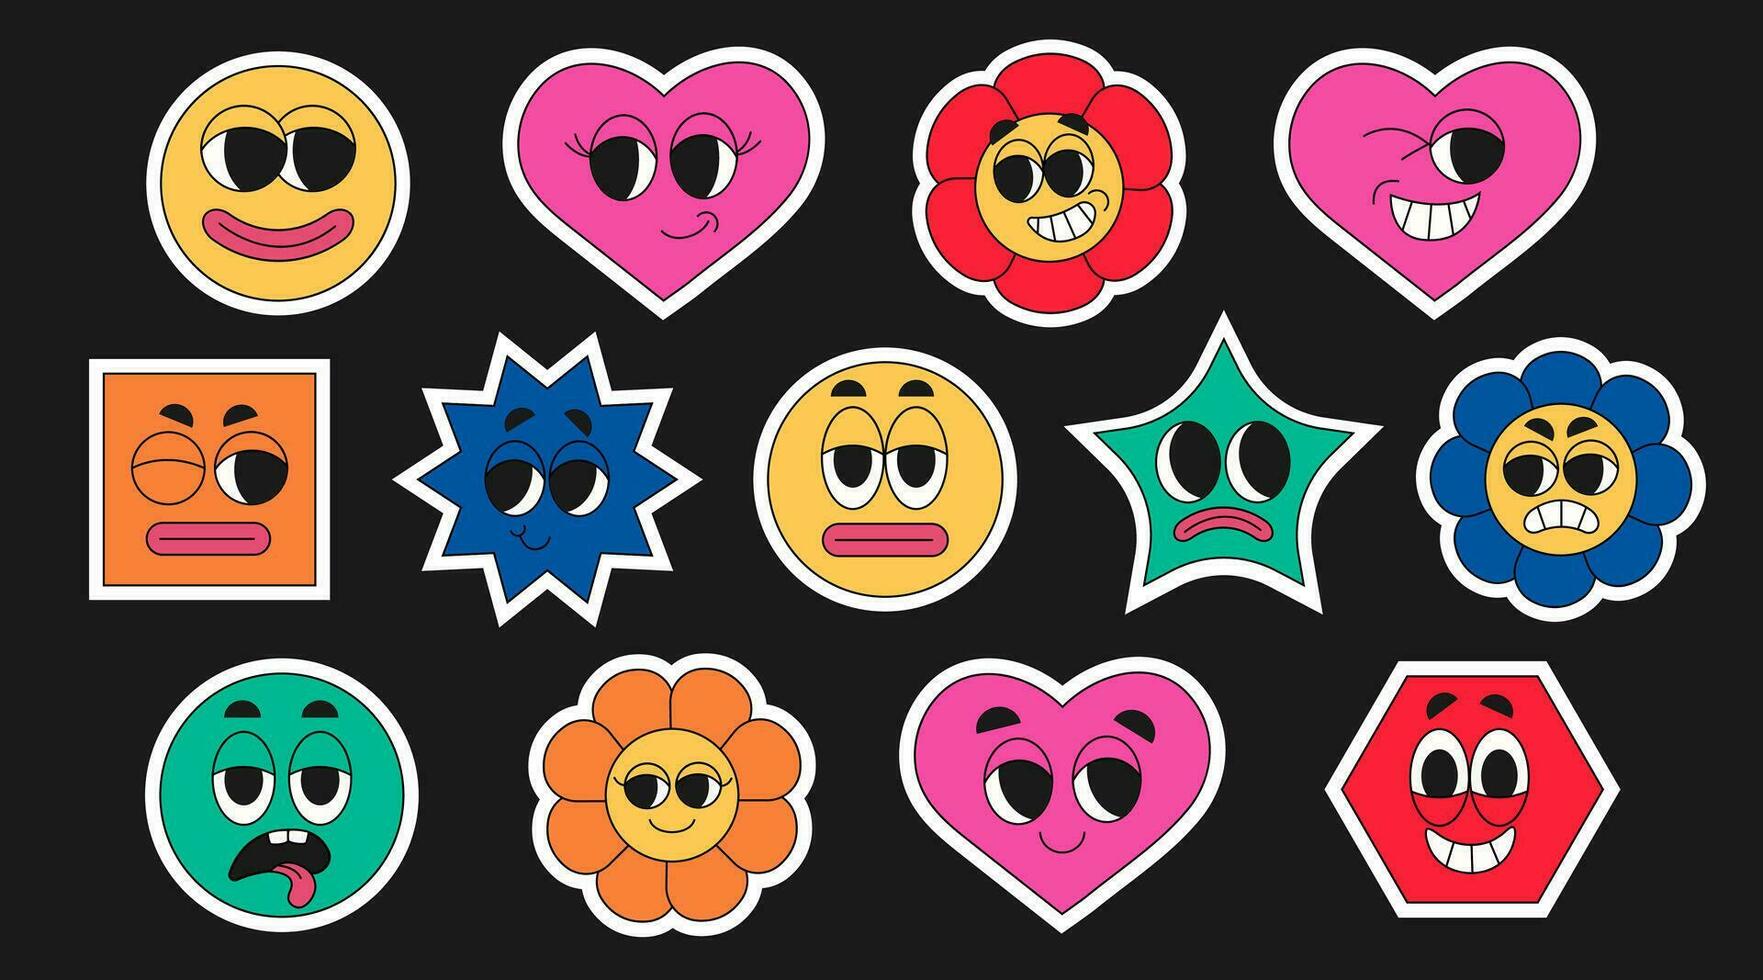 Sticker retro y2k pack set. Funny smiling happy face colorful sticker label. Cool Trendy Y2k style. Vector illustration of 70s groove elements